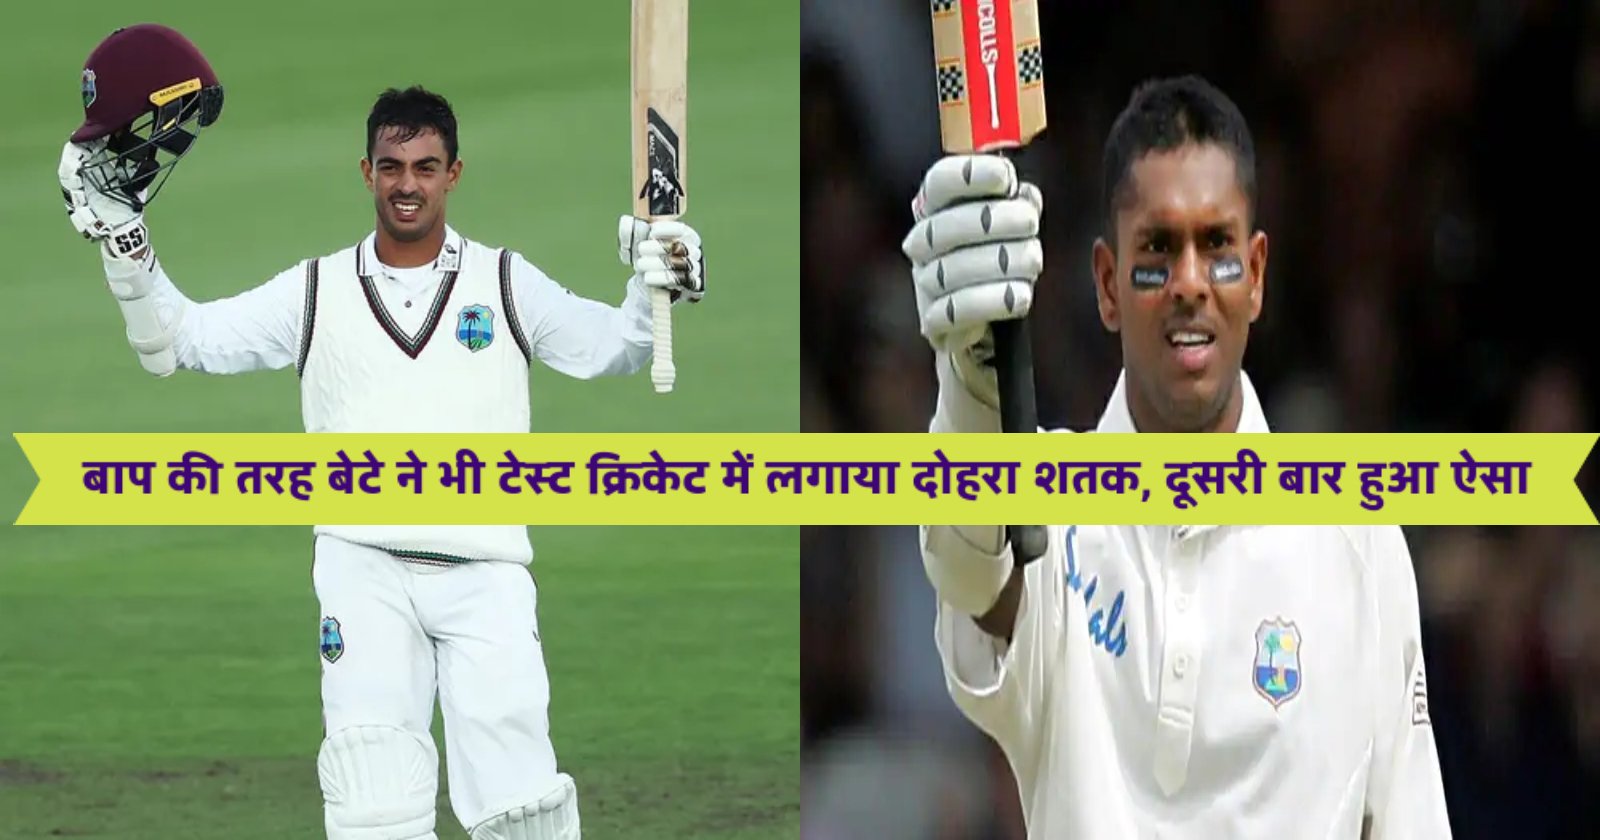 son and father pair to hit test cricket century and double Century in Hindi test cricket records